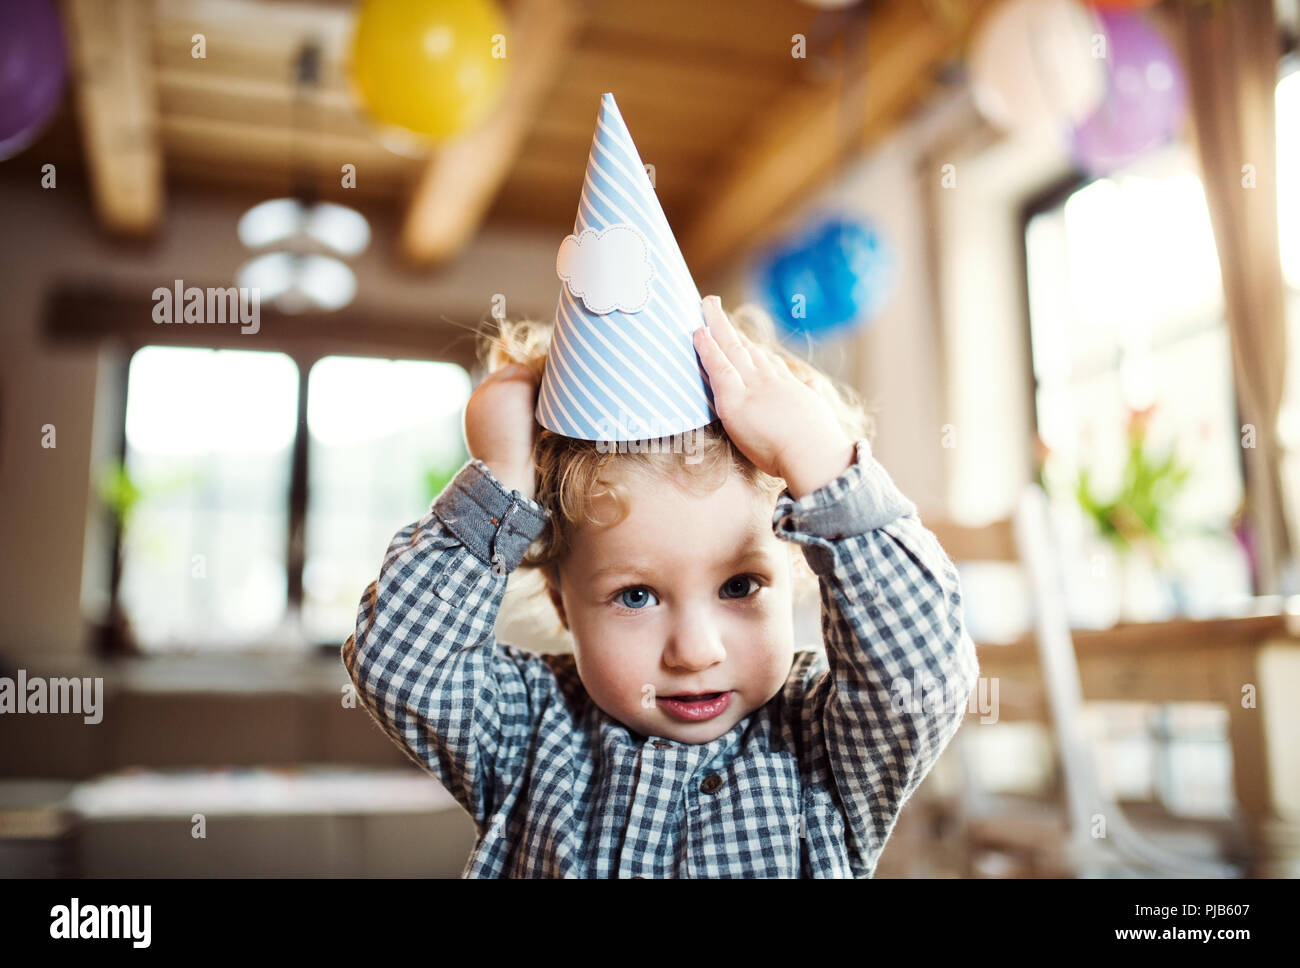 A toddler boy with a party hat standing inside at home. Stock Photo